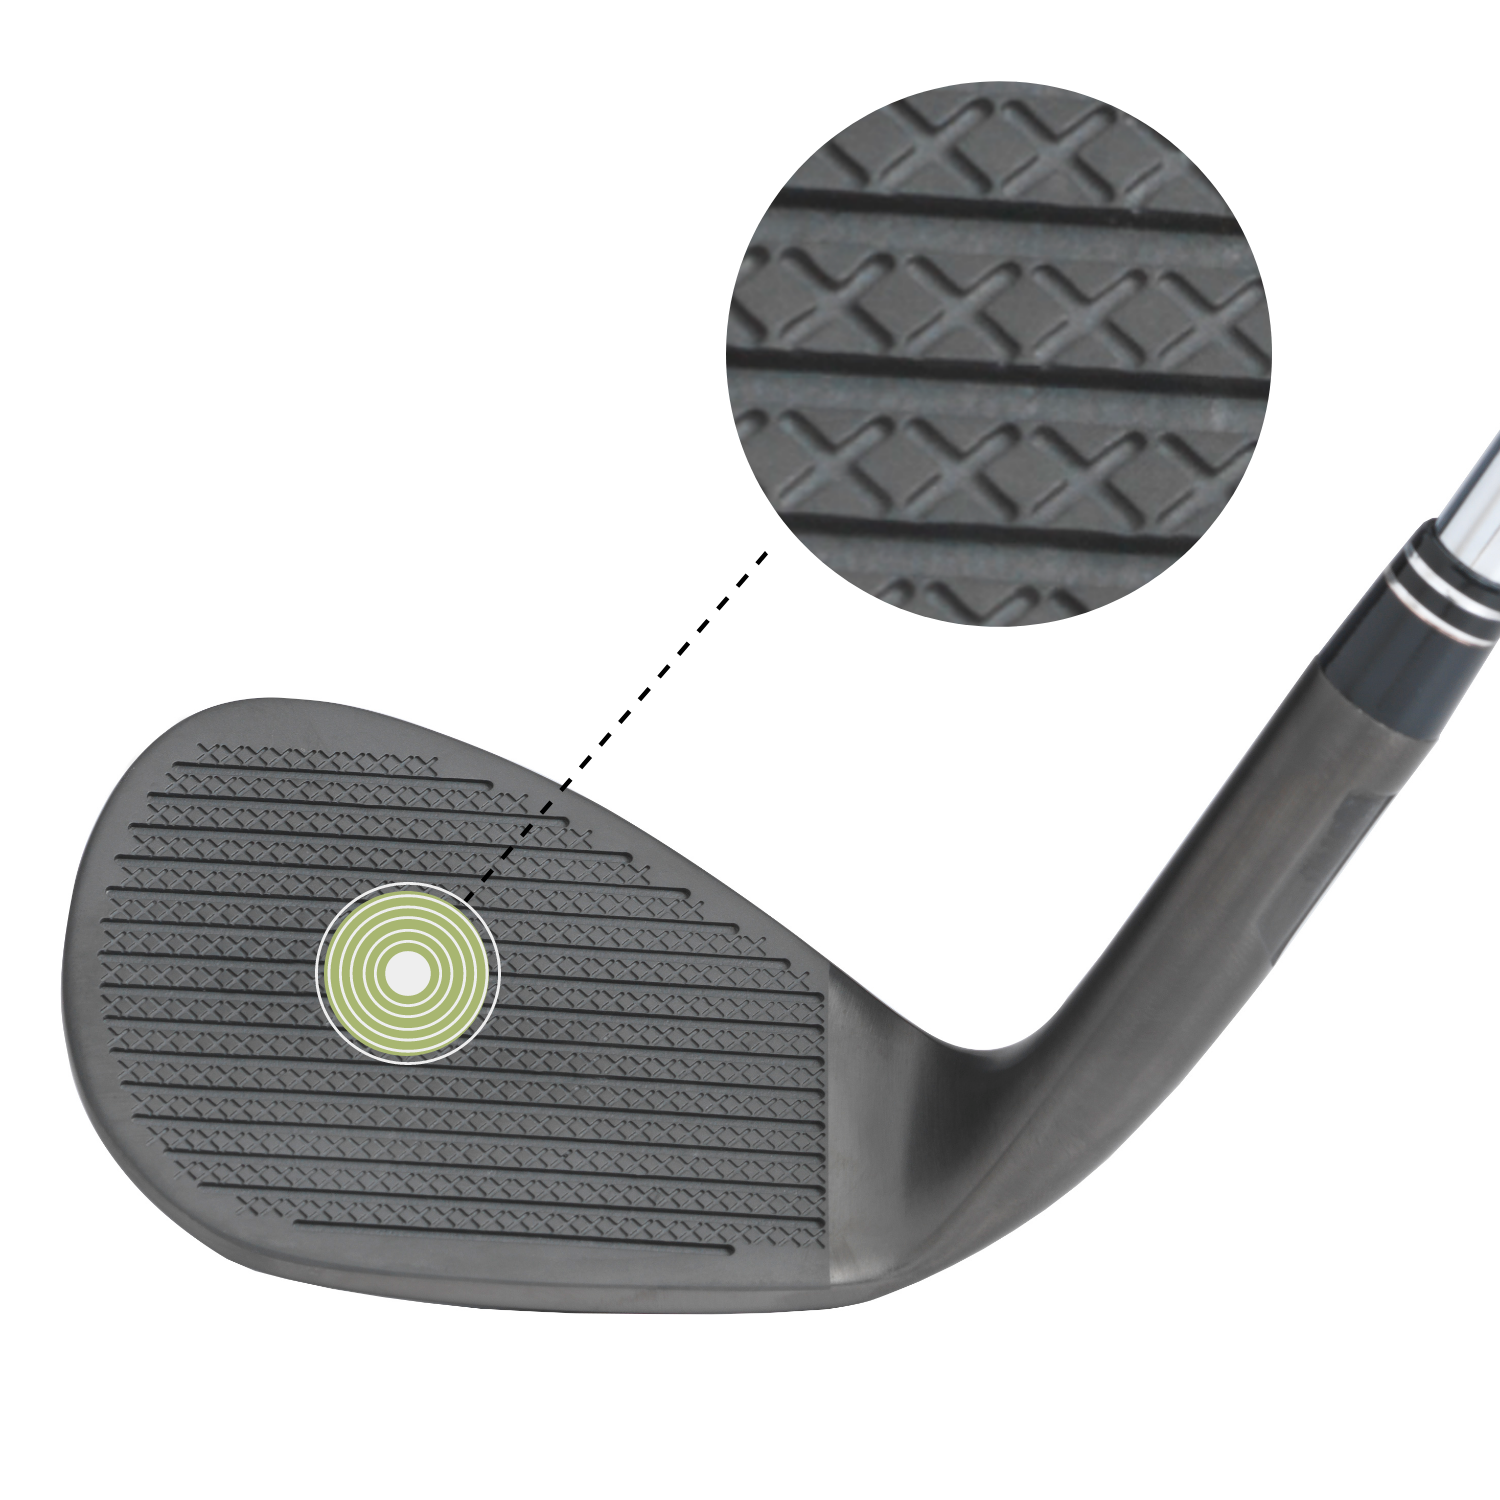 This picture shows a SmithWorks freestyle wedge